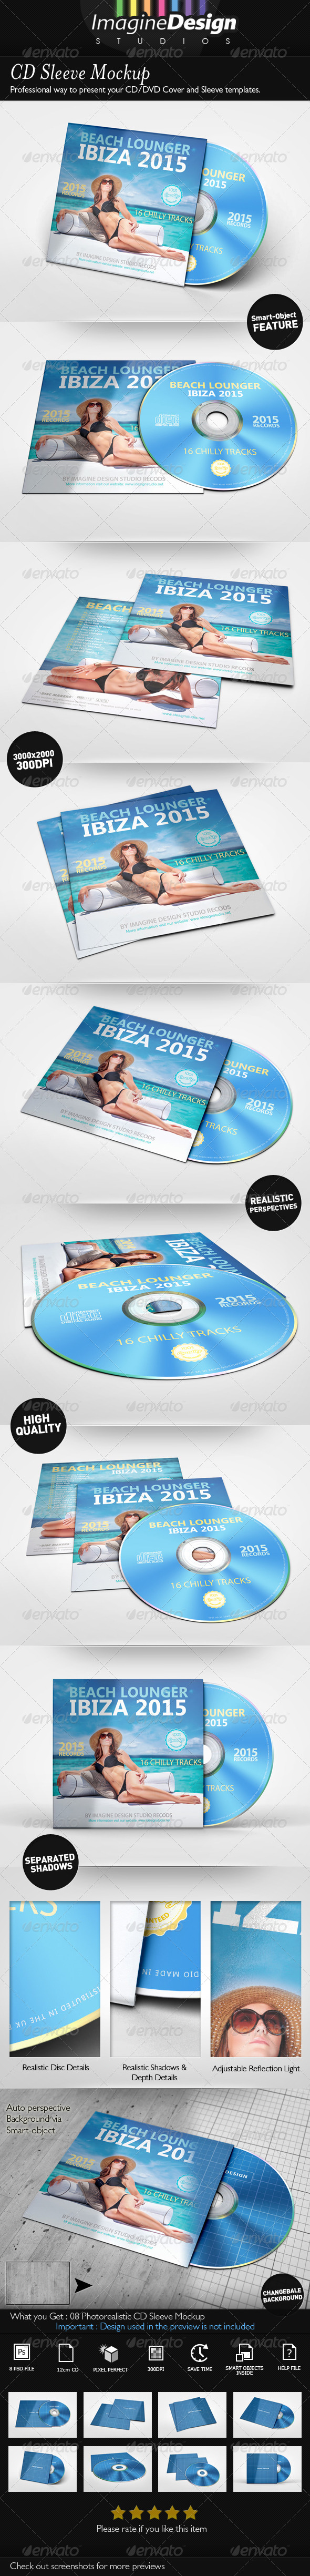 Download Cd Packaging Mockups From Graphicriver PSD Mockup Templates